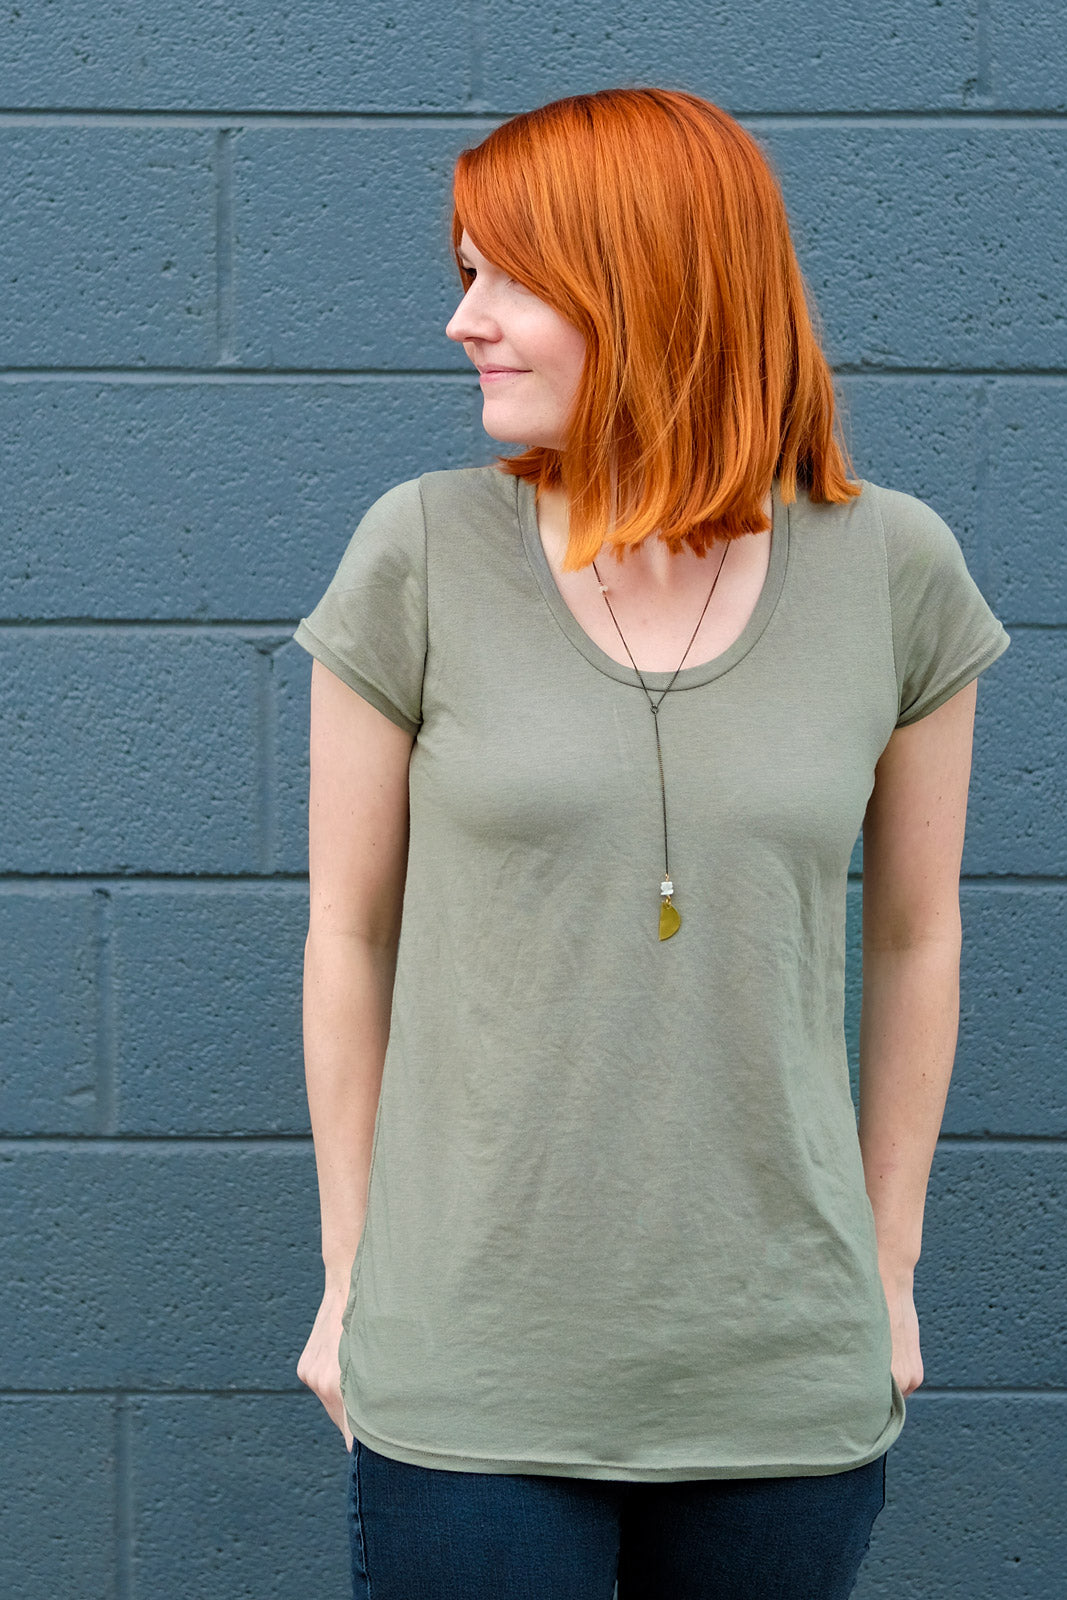 Straight Stitch Designs Montlake Tee made in Bamboo Cotton Jersey